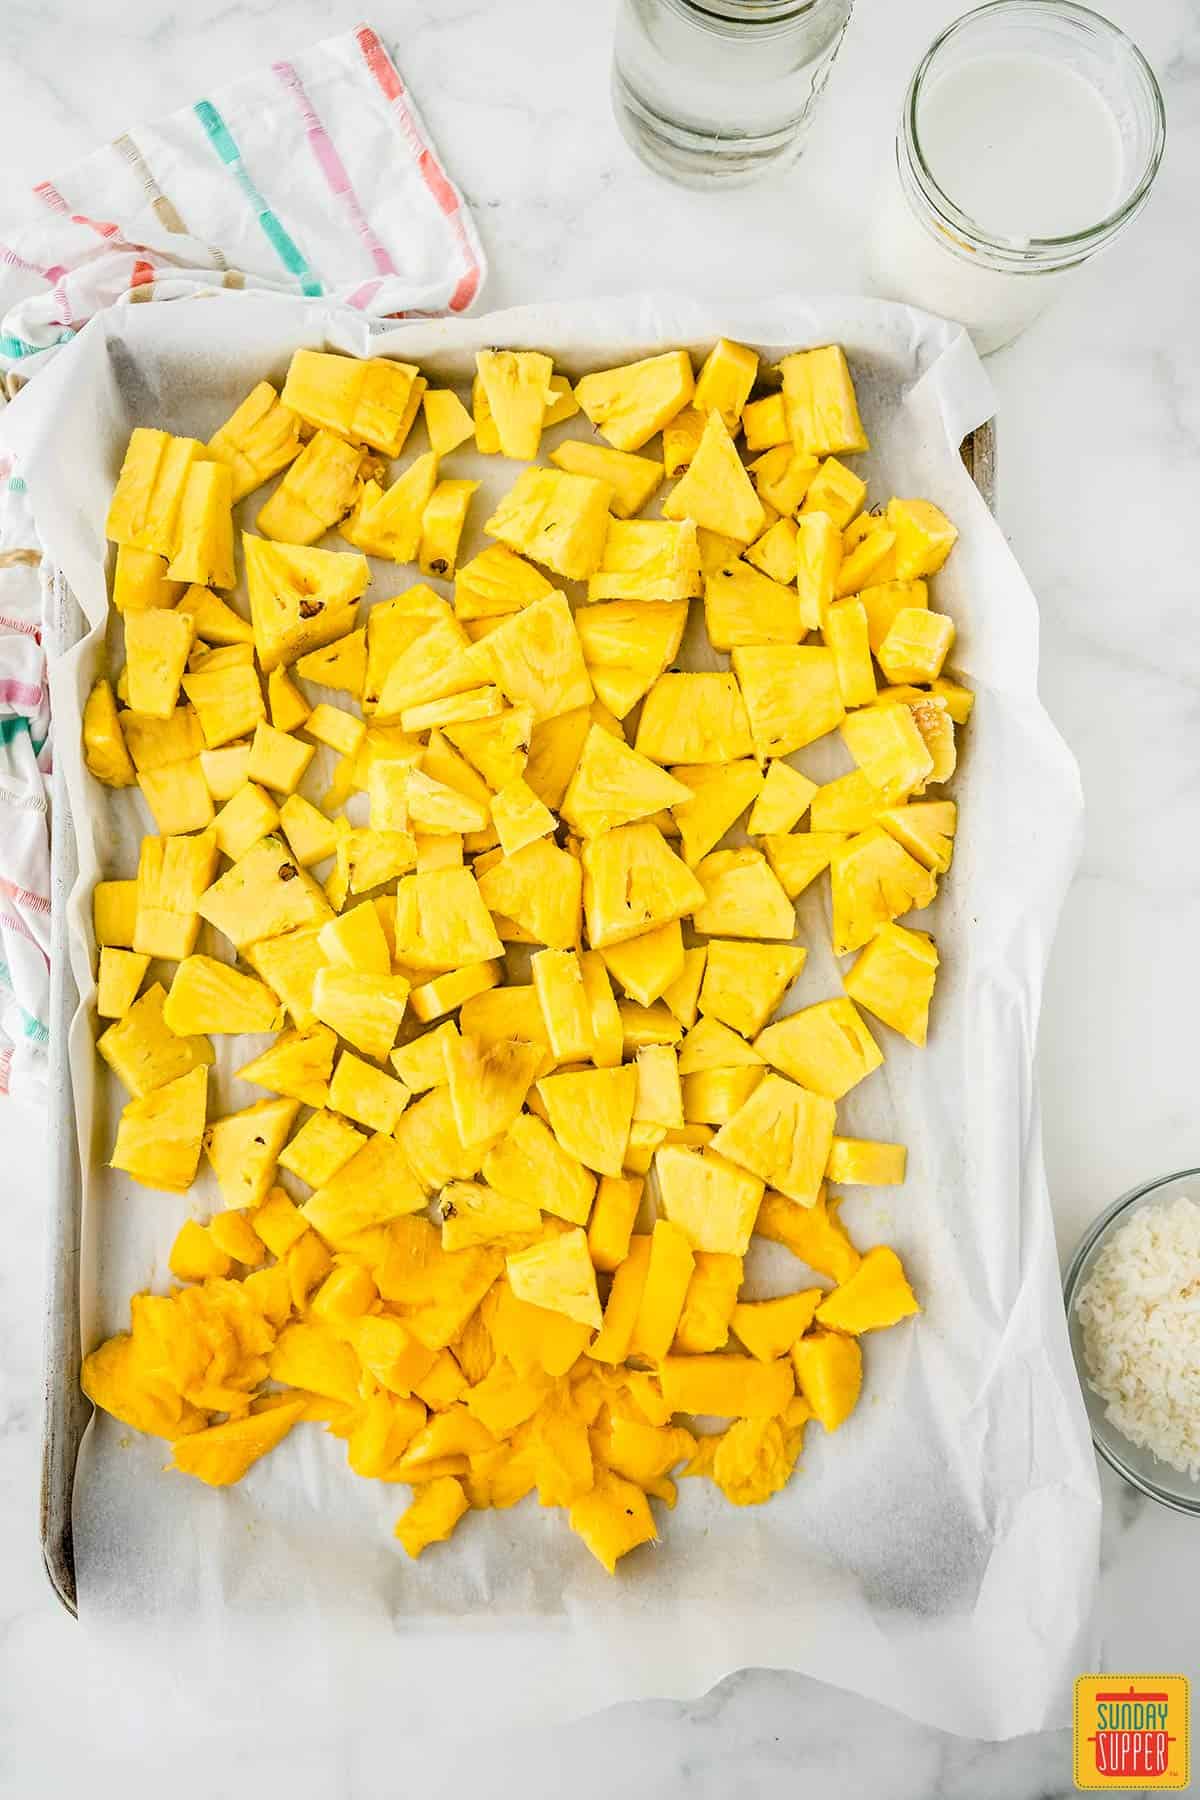 Pineapple and mango slices on a tray next to a bowl of coconut flakes